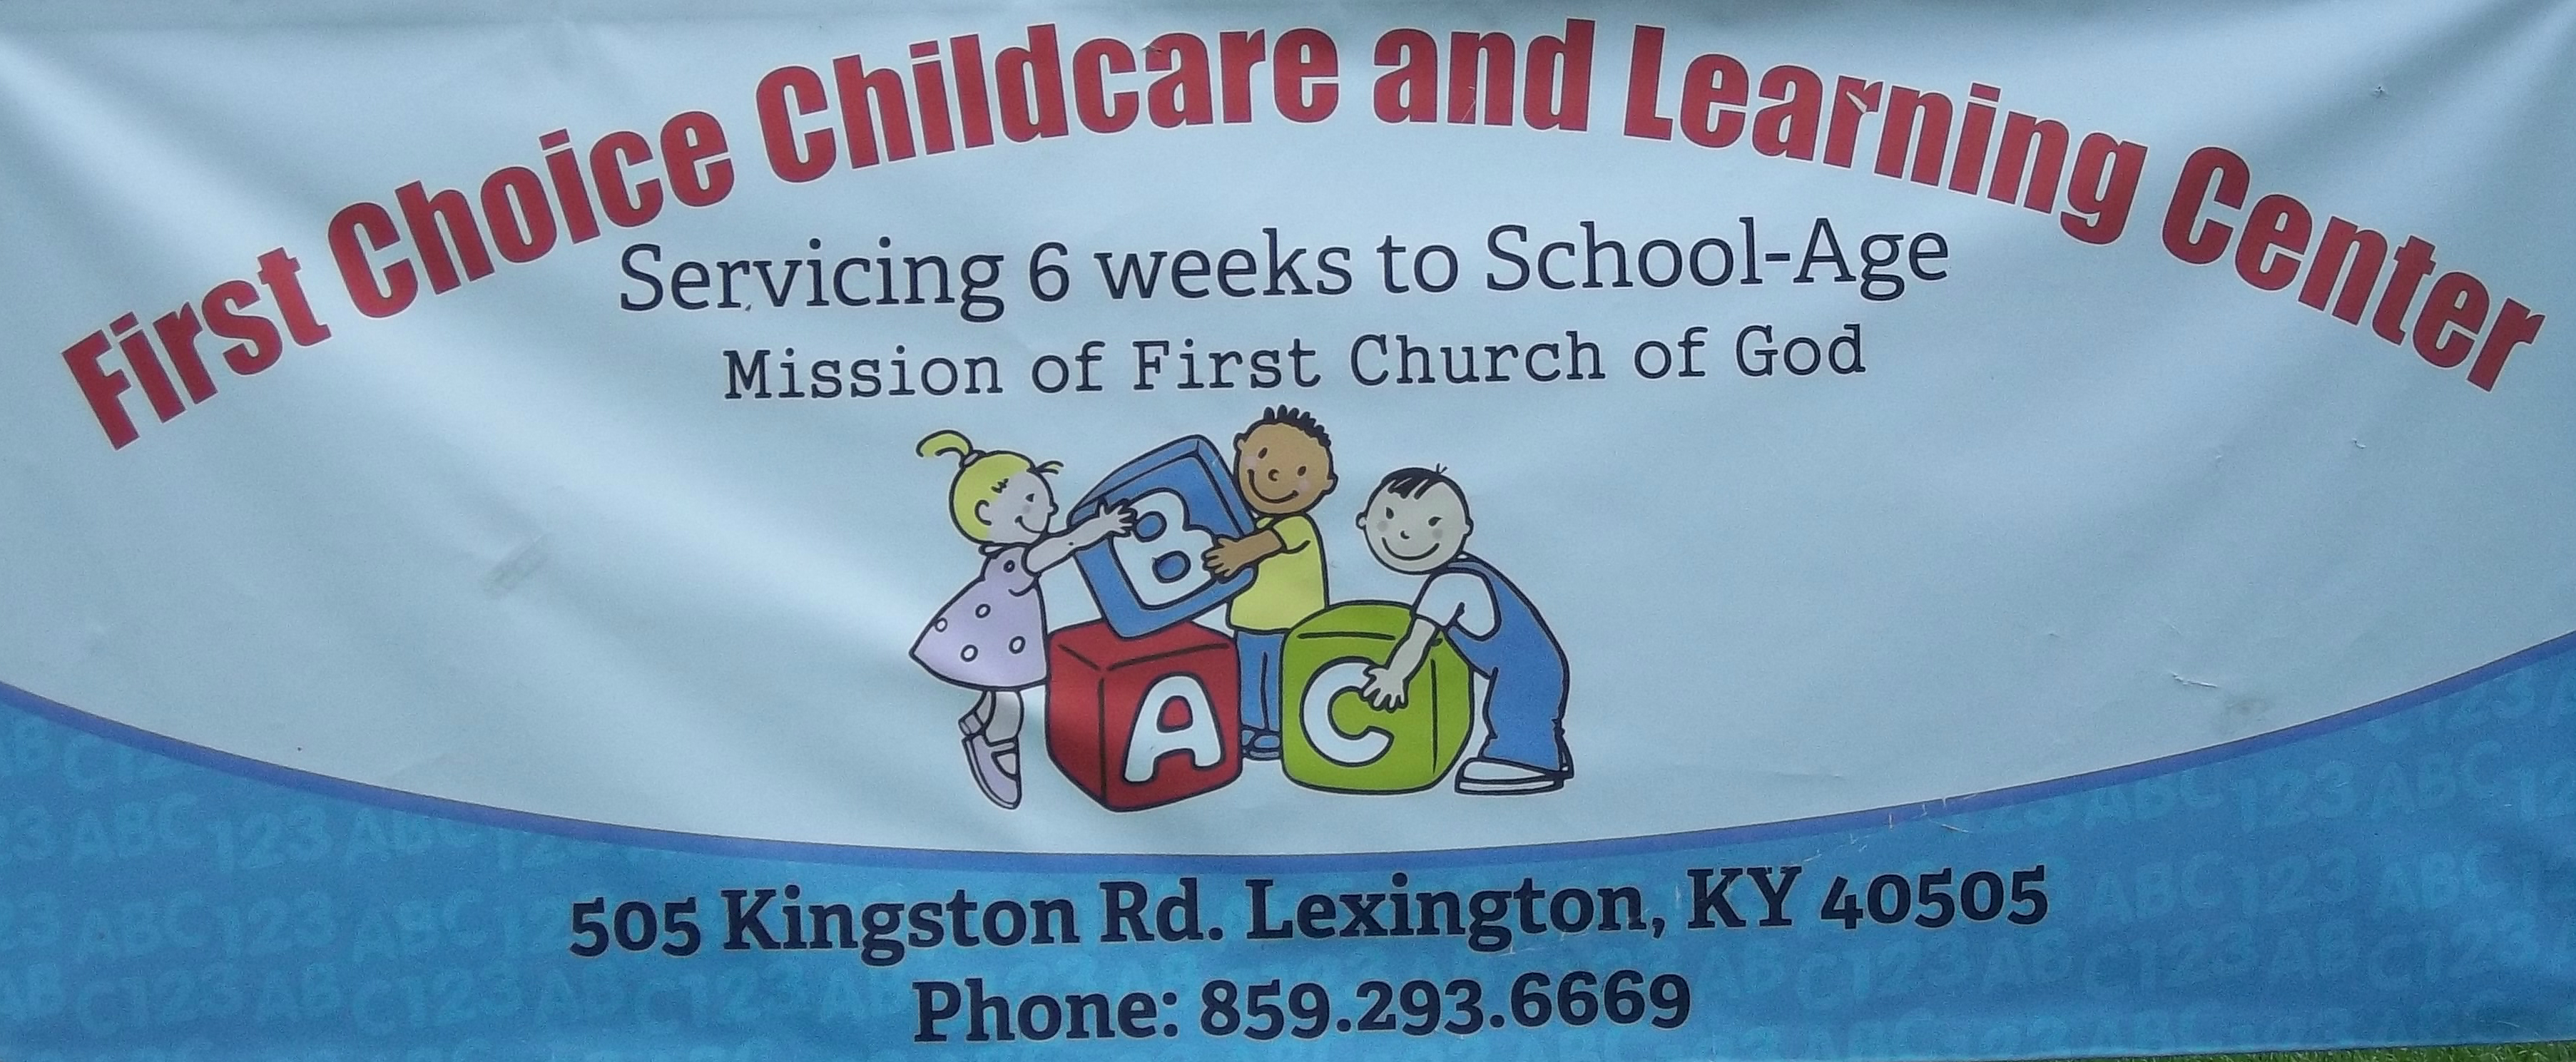 First Choice Childcare and Learning Center